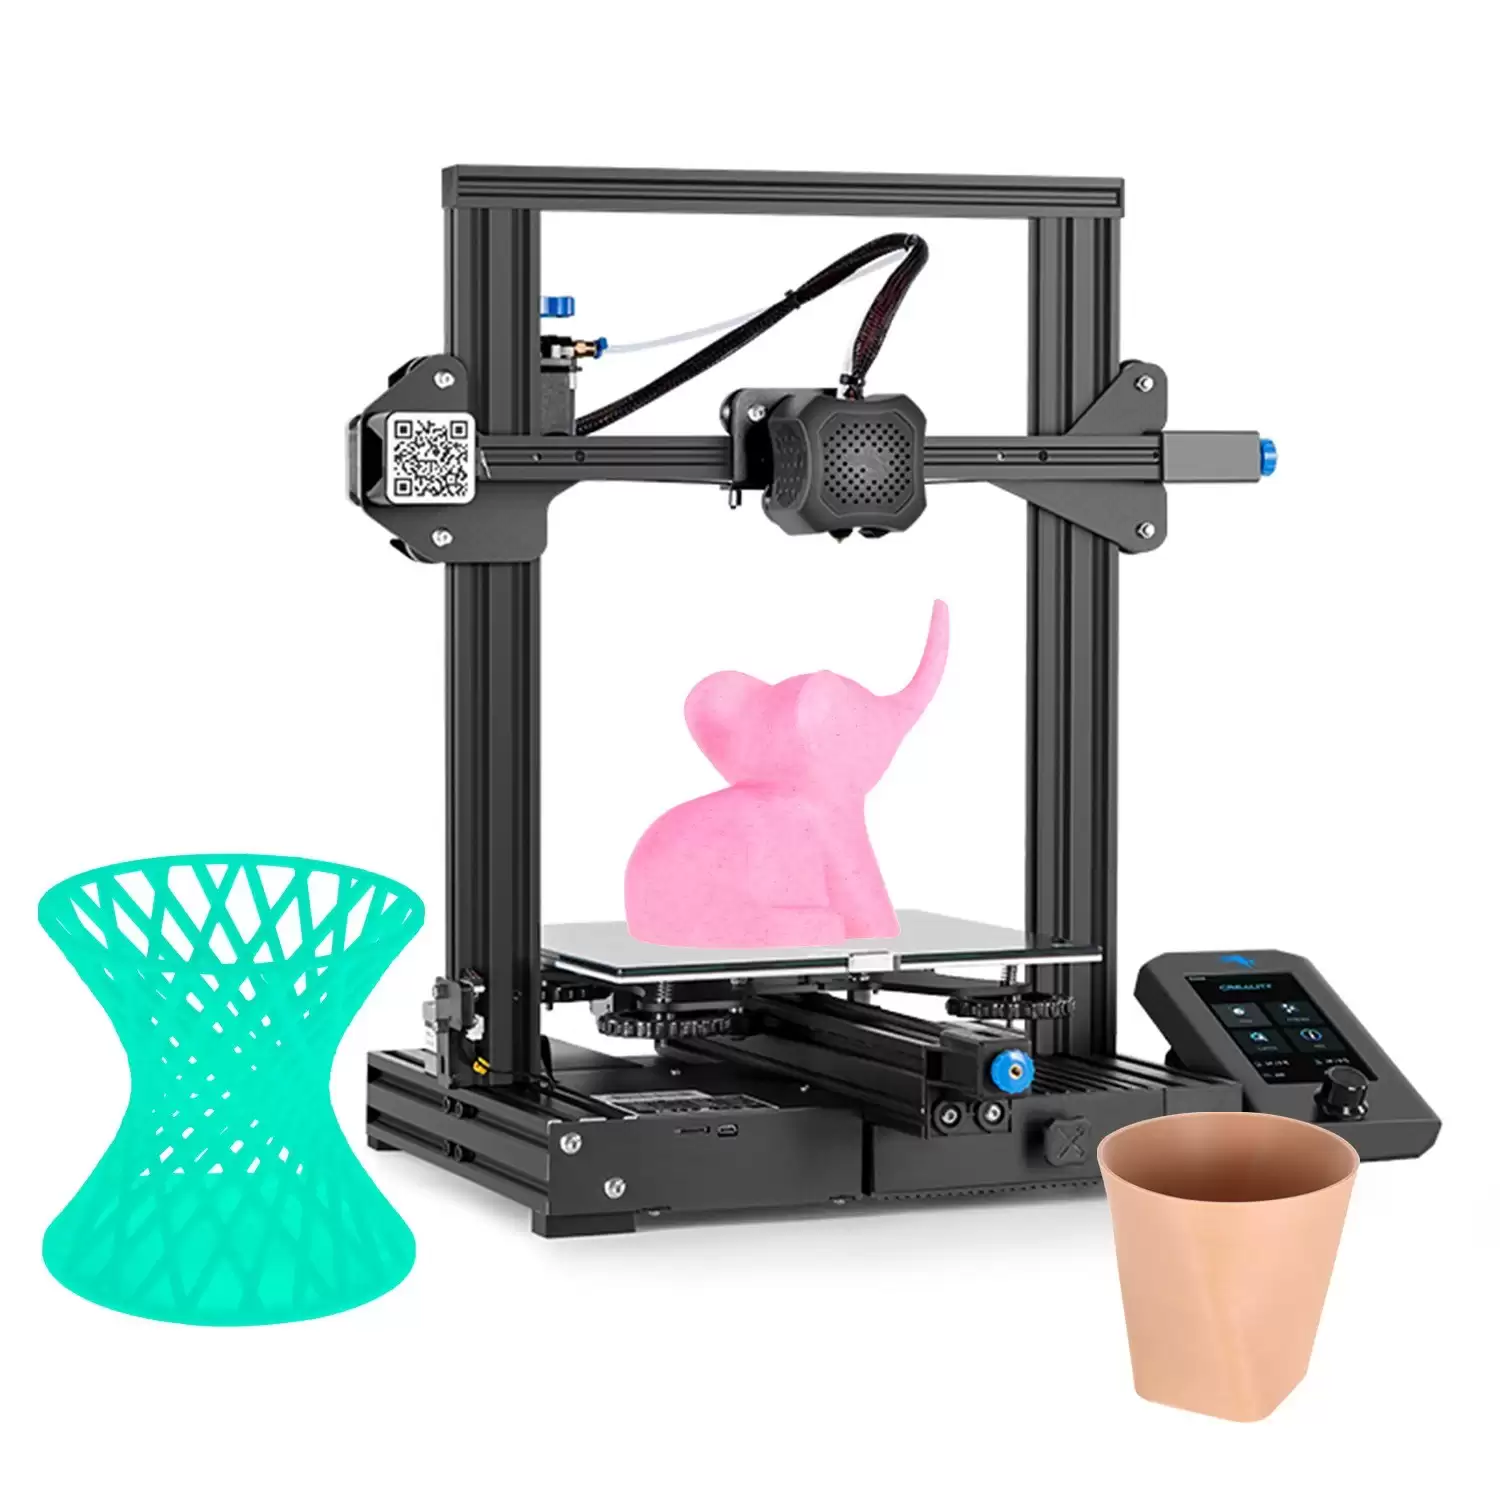 Get Extra 67% Discount On Creality Ender-3 V2 3d Printer Diy Kit, Best Price $229 With This Discount Coupon At Tomtop